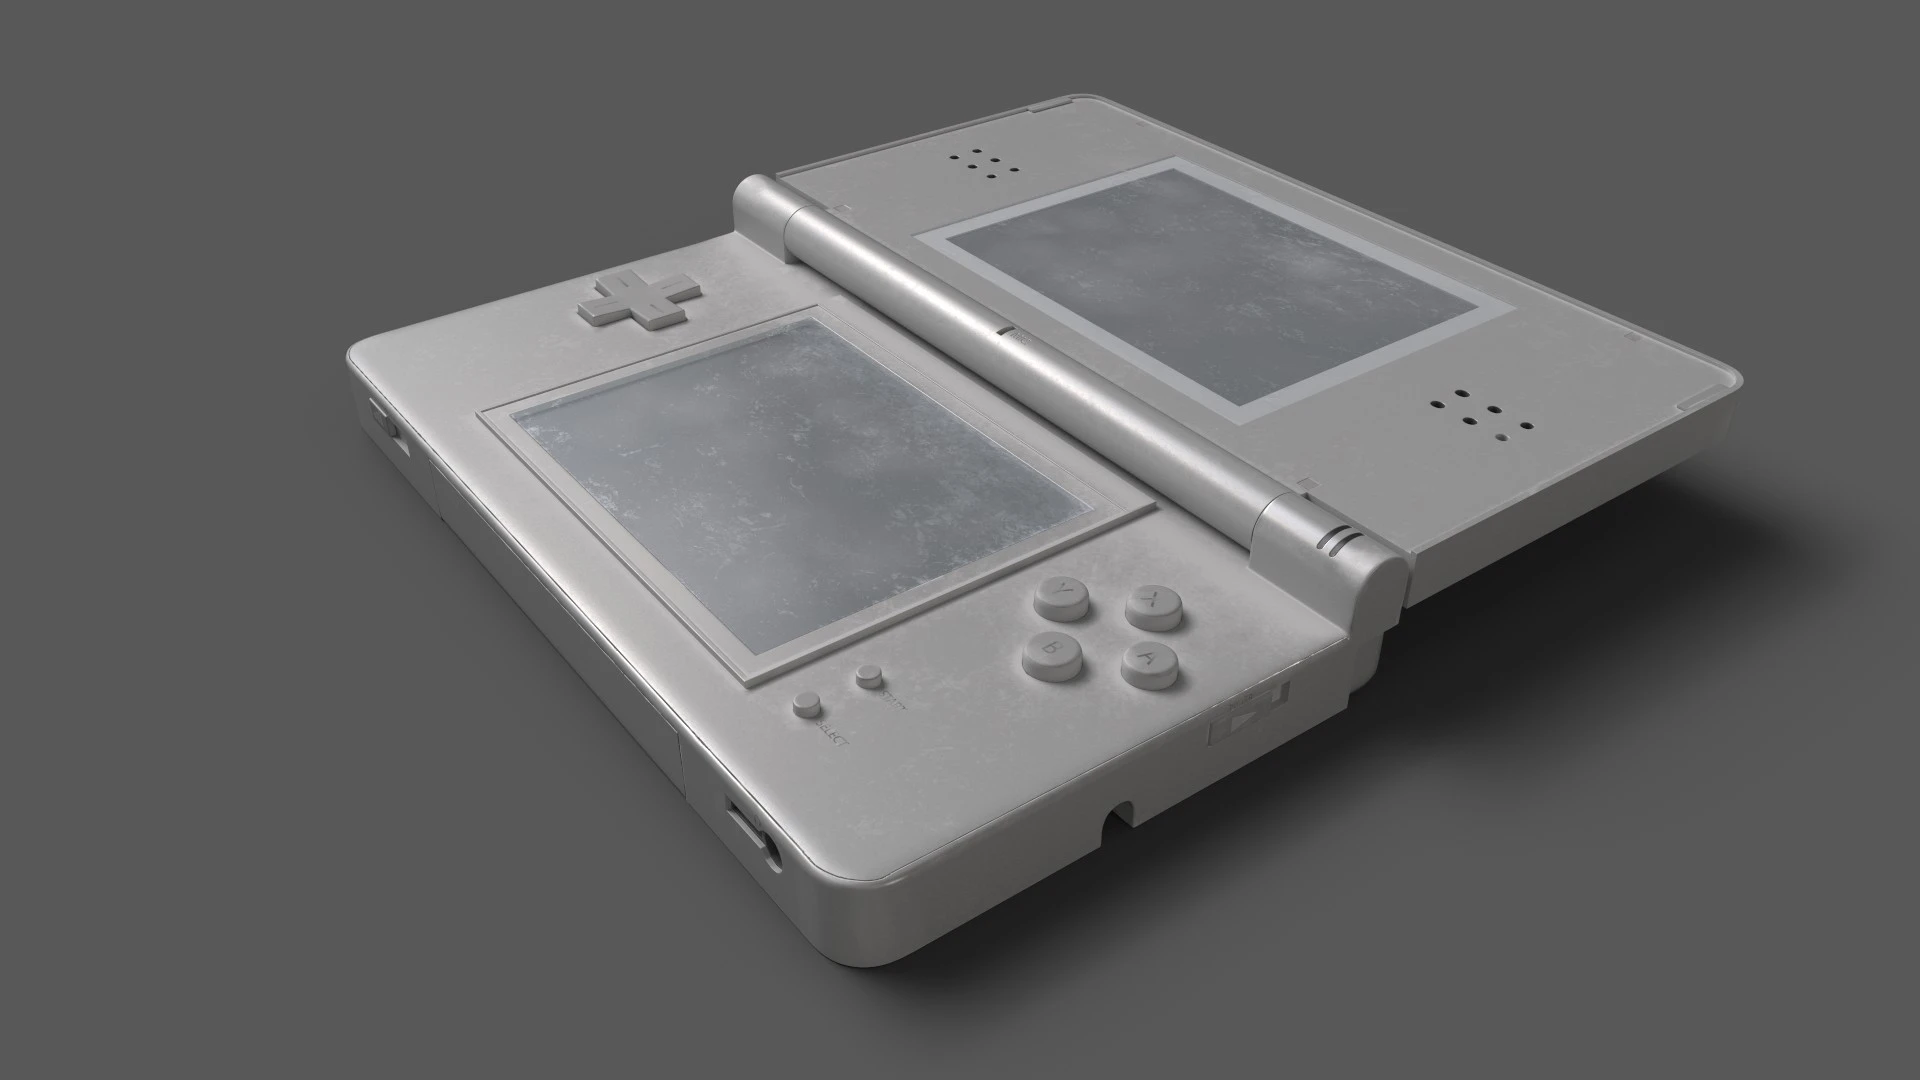 Dirty 3d render of a DS n1